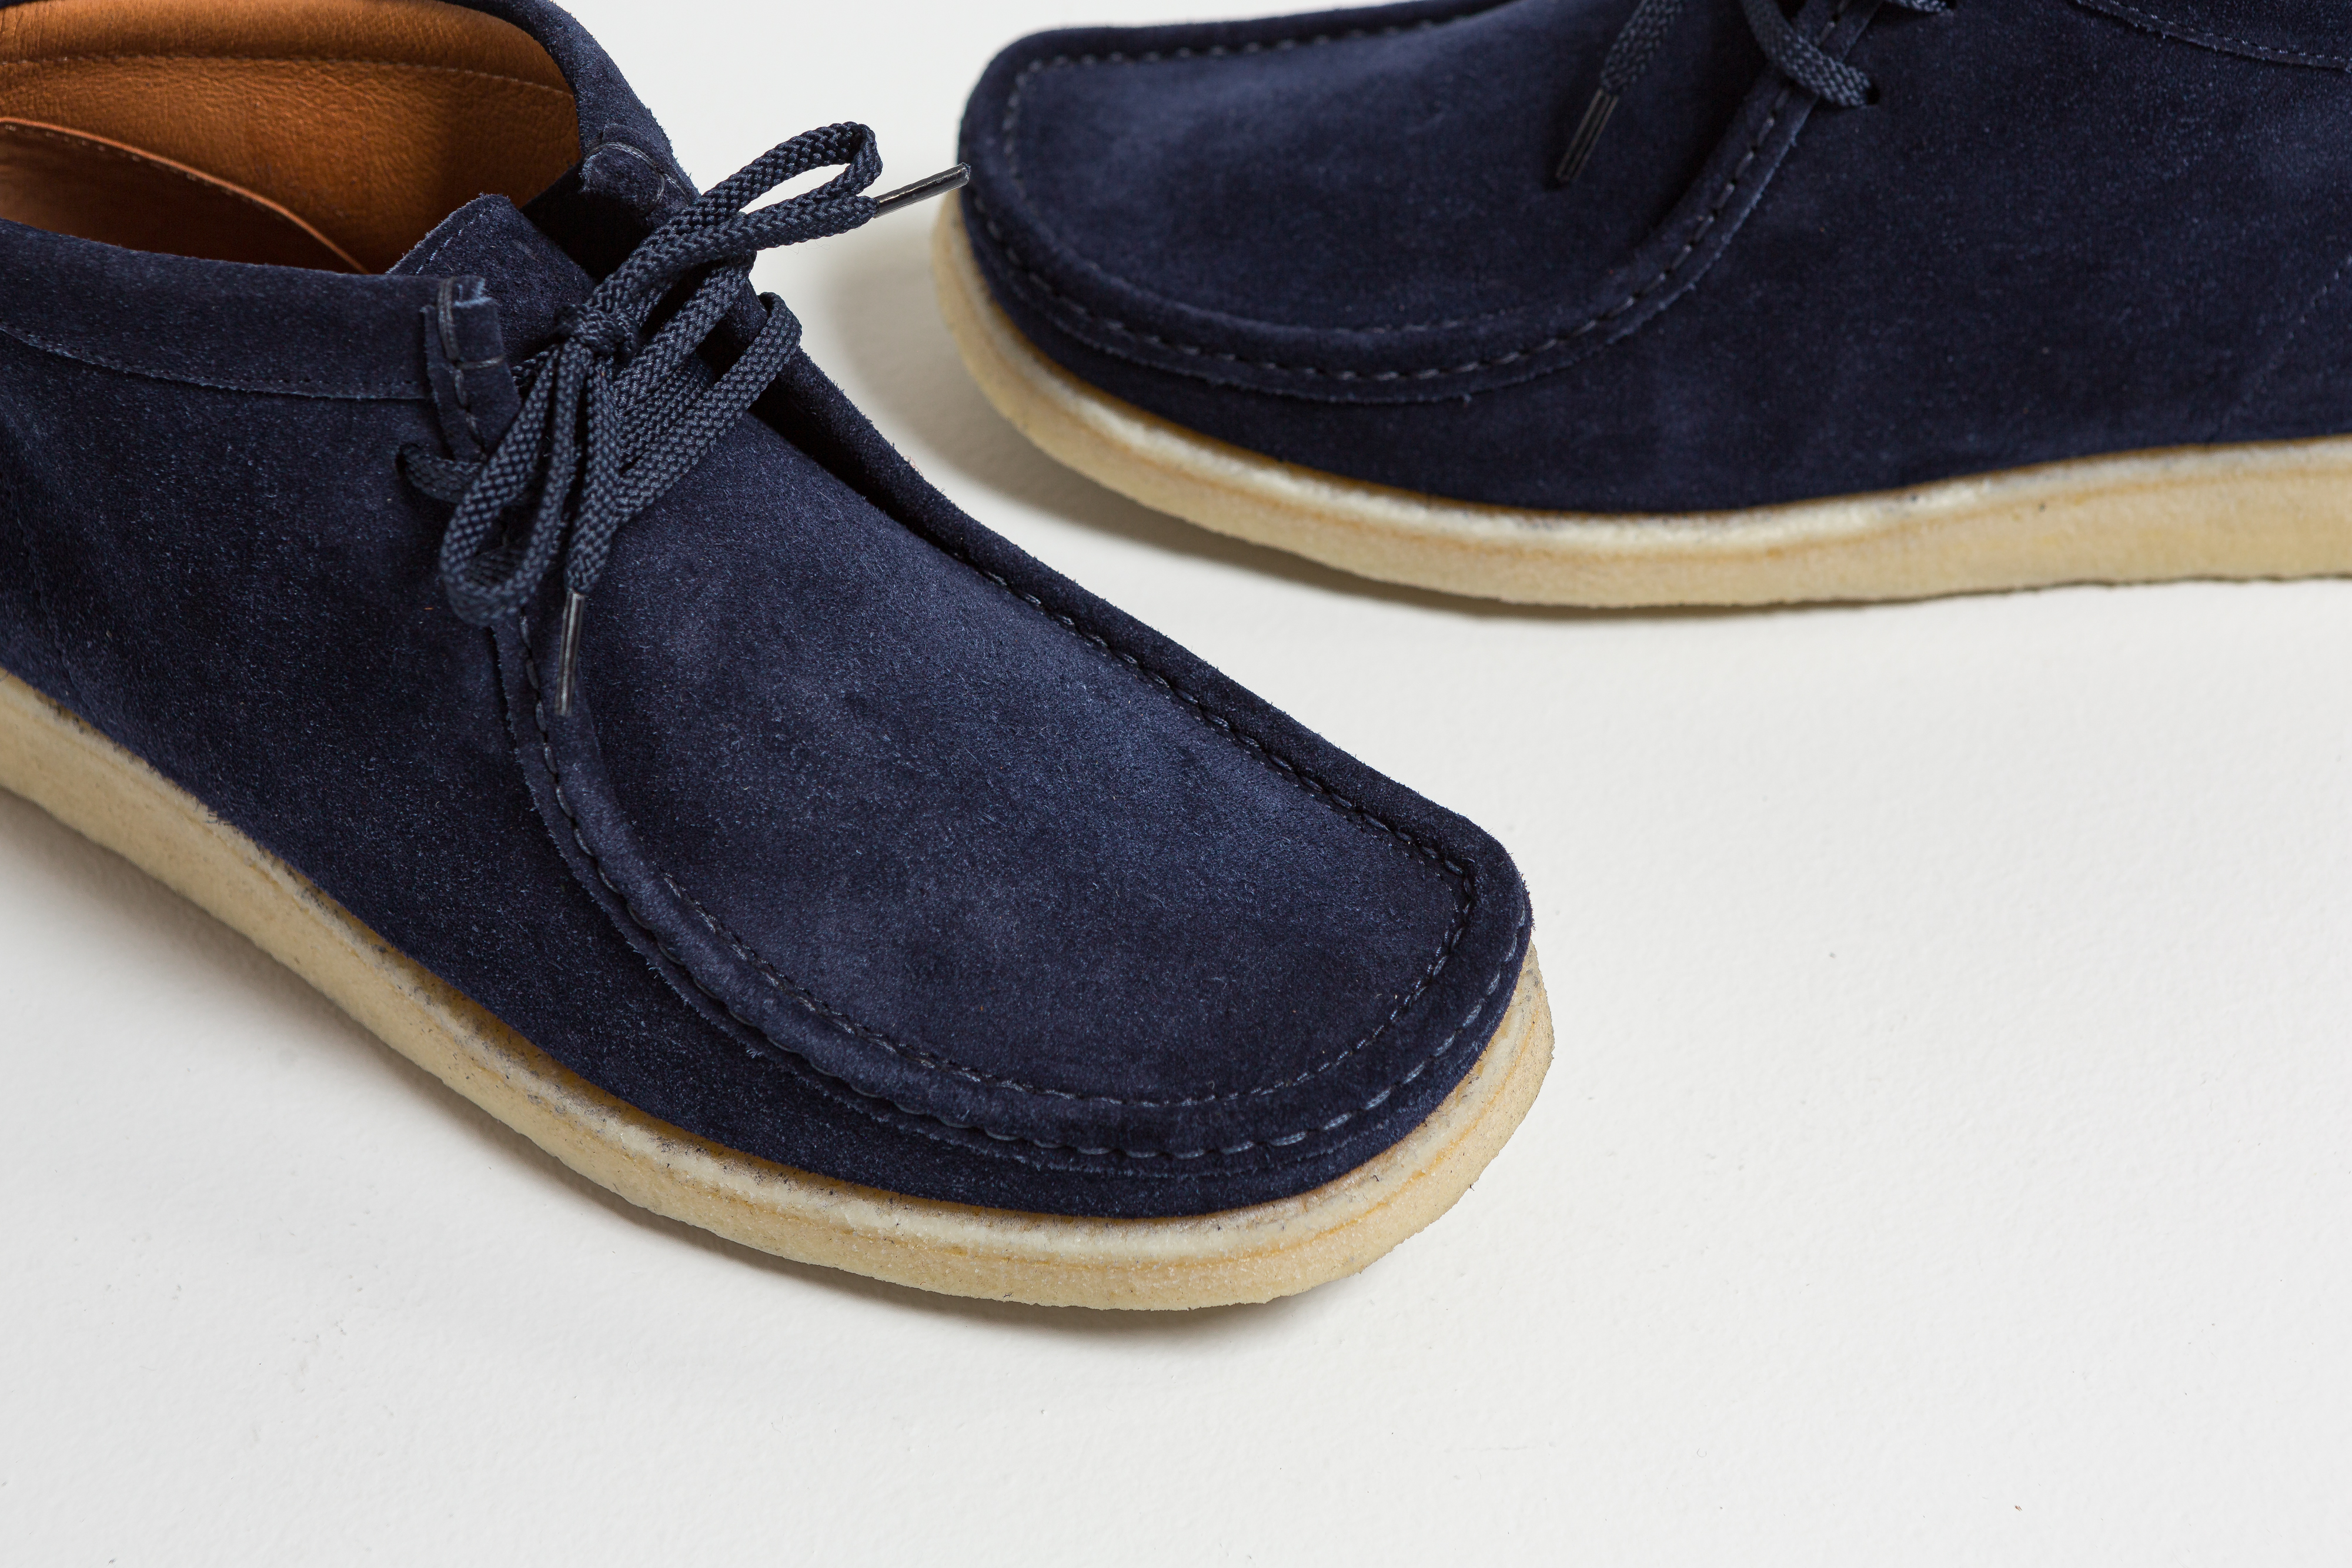 Up There Store - Introducing Padmore & Barnes The Original Wallabee Boot